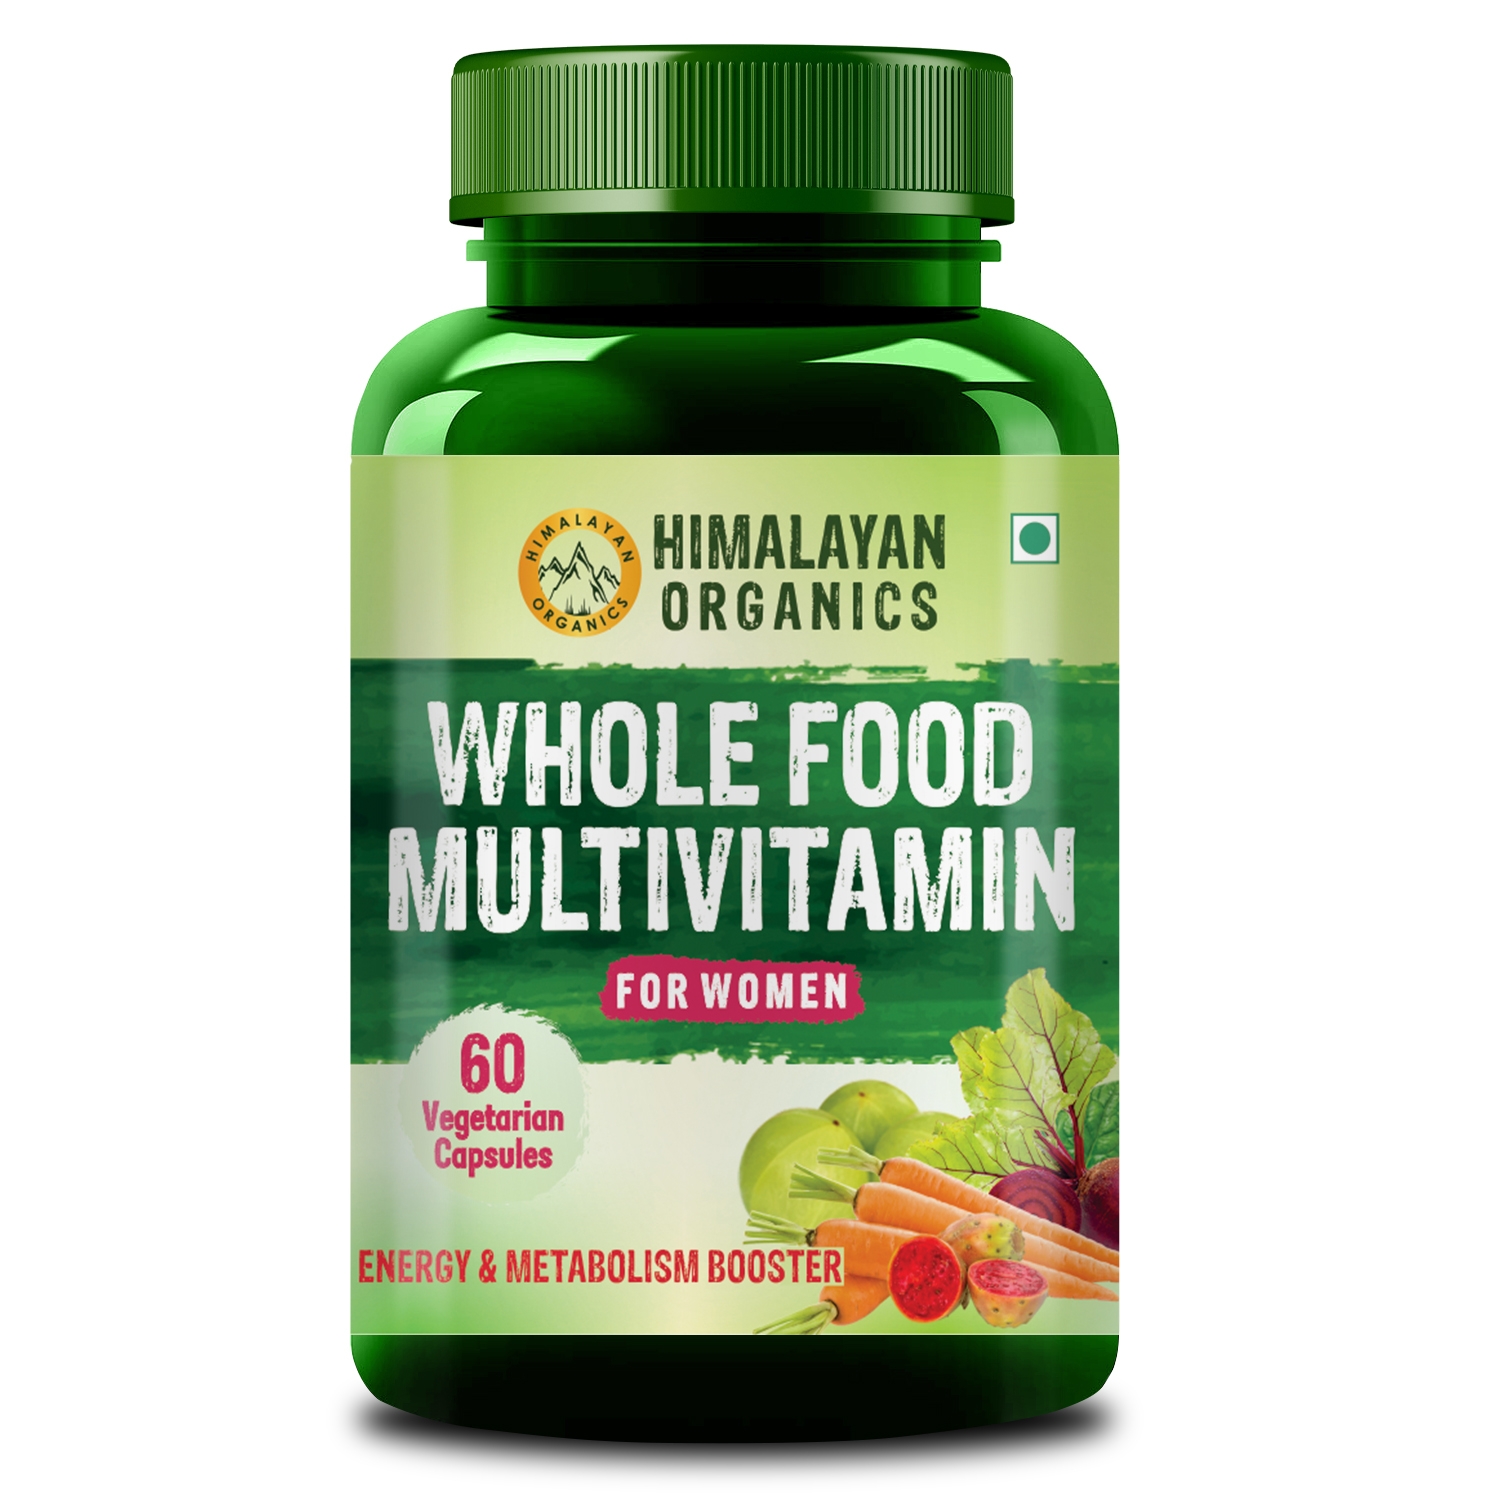 Himalayan Organics | Himalayan Organics Whole Food Multivitamin for Women || With Natural Vitamins, Minerals, Extracts || Best for Energy, Brain, Bone Health || 60 Veg Capsules